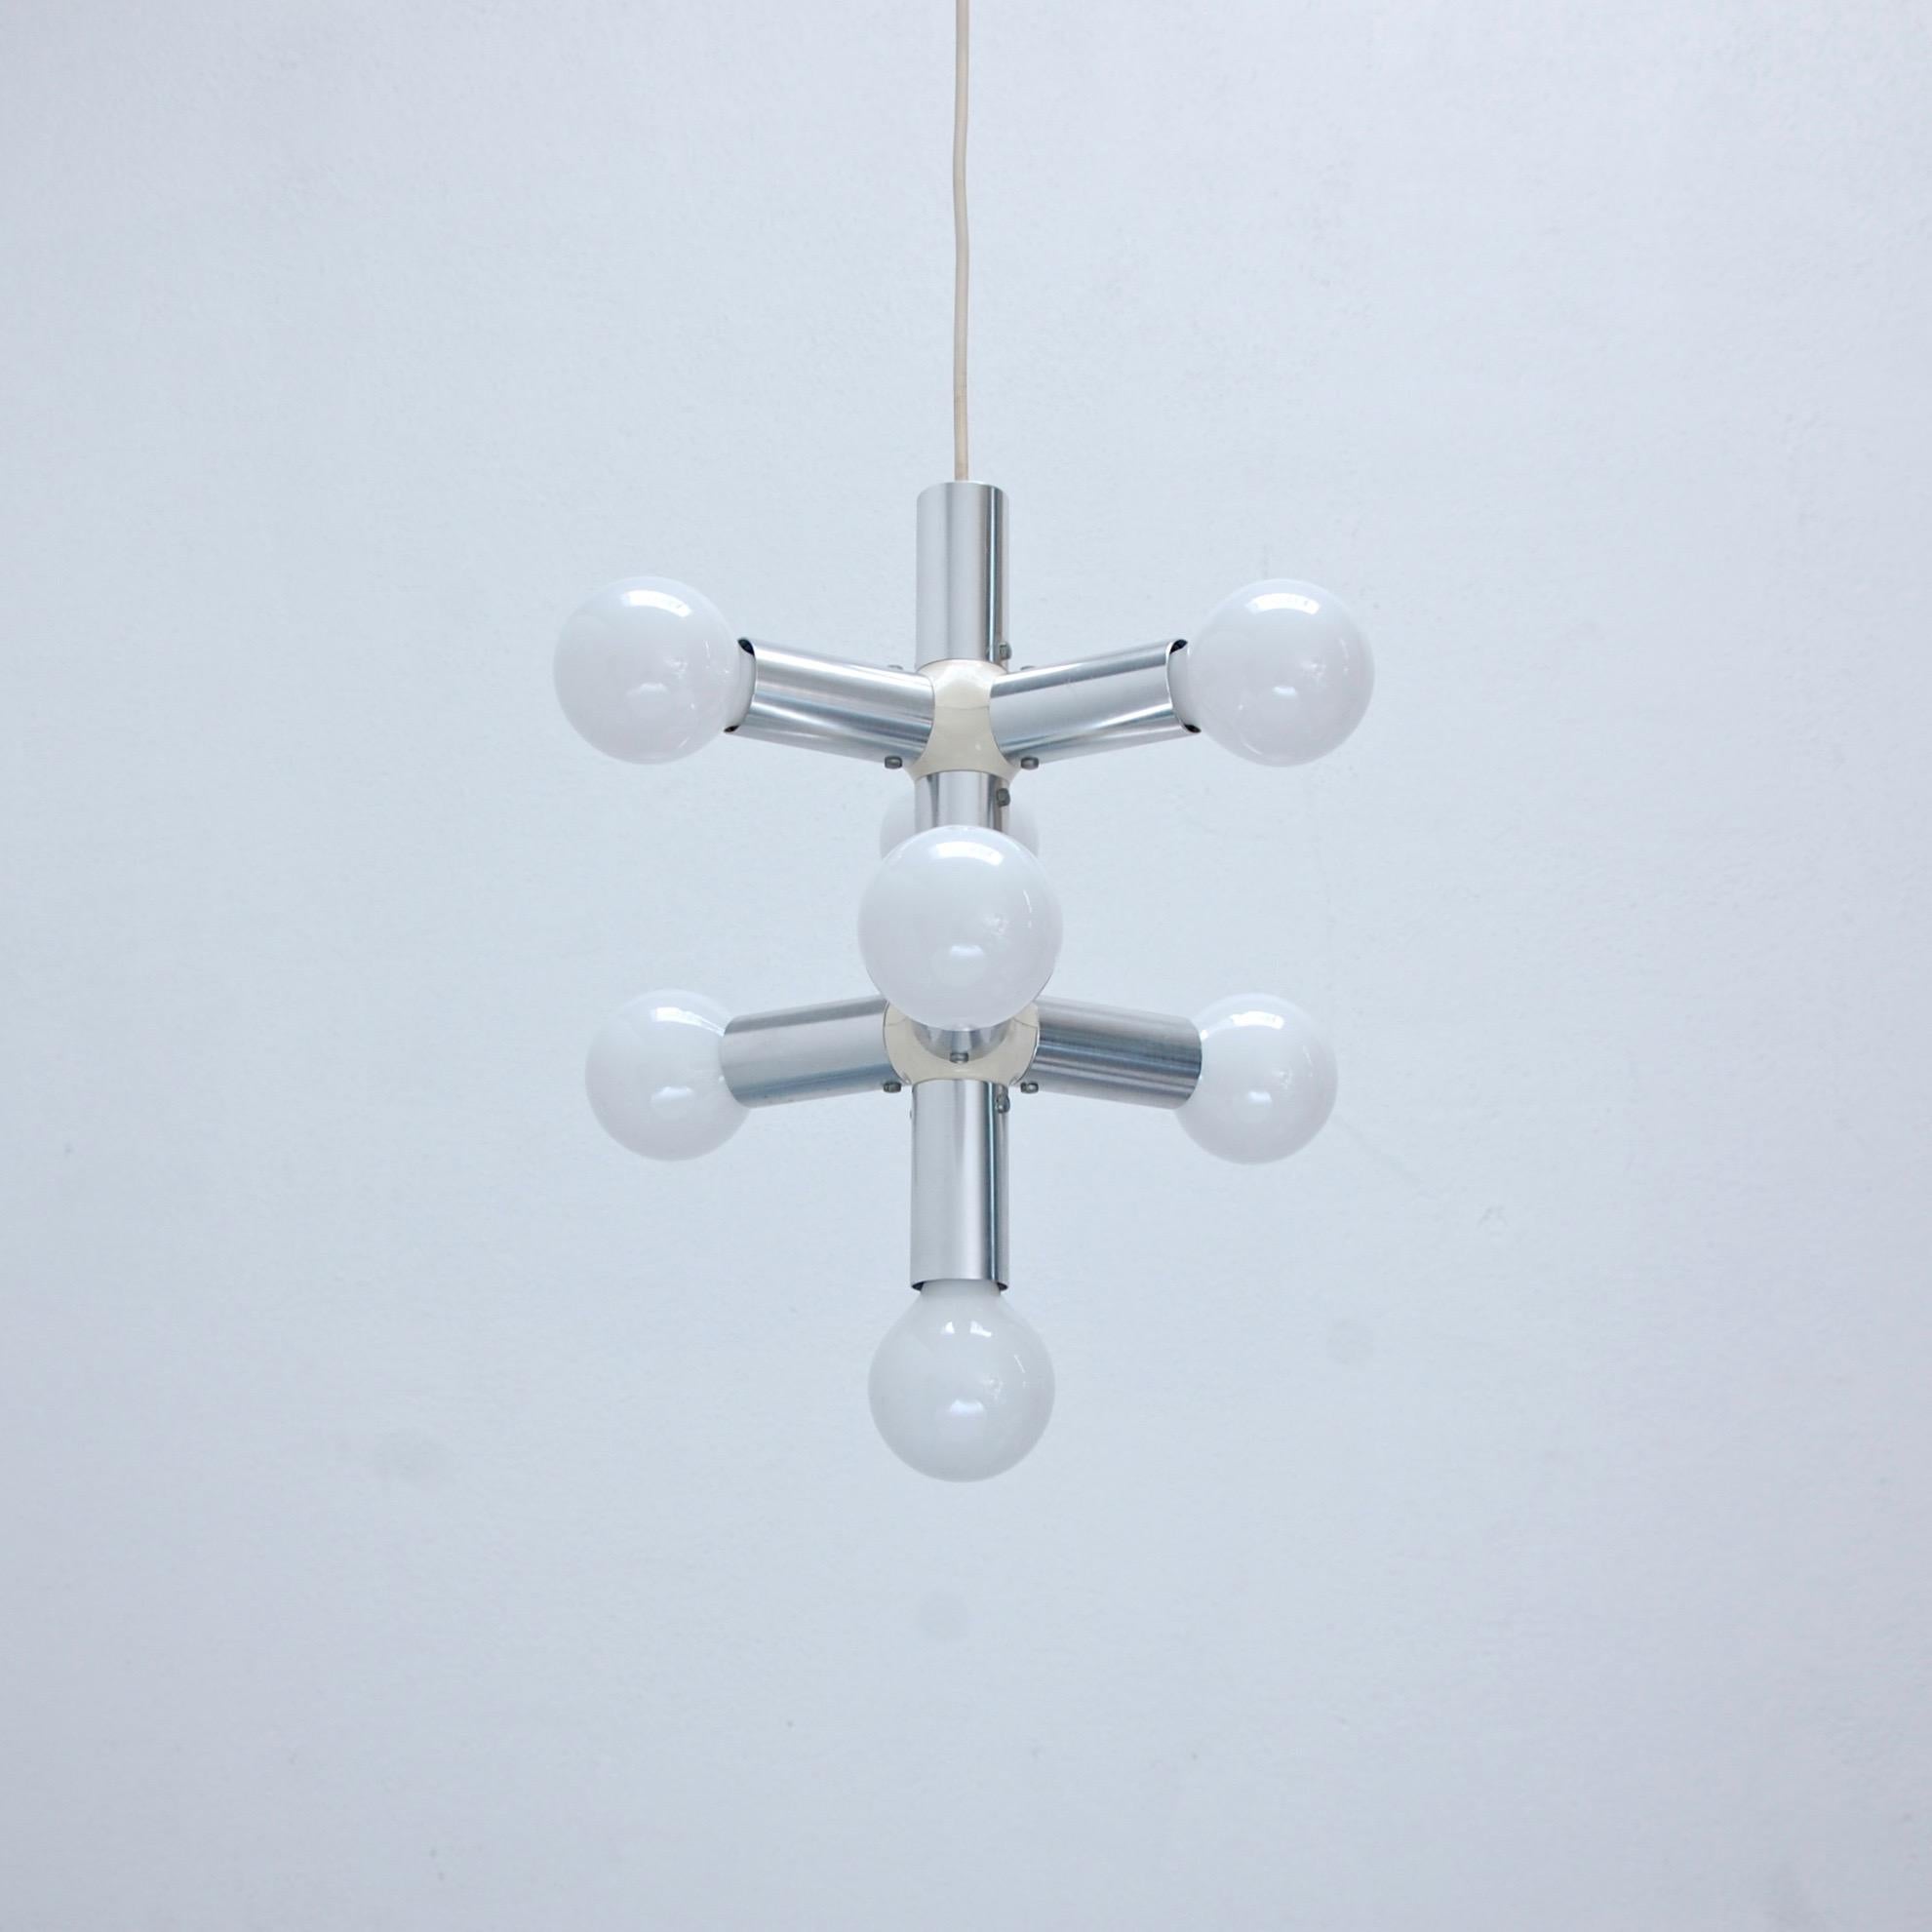 Small modular 1960s Italian pendant in satin aluminum and molded acrylic finish. Partially restored and wires have all been checked. 7-globe bulbs (G25) E26 medium based light sockets. Light bulbs included with order.
Measurements:
Fixture height: